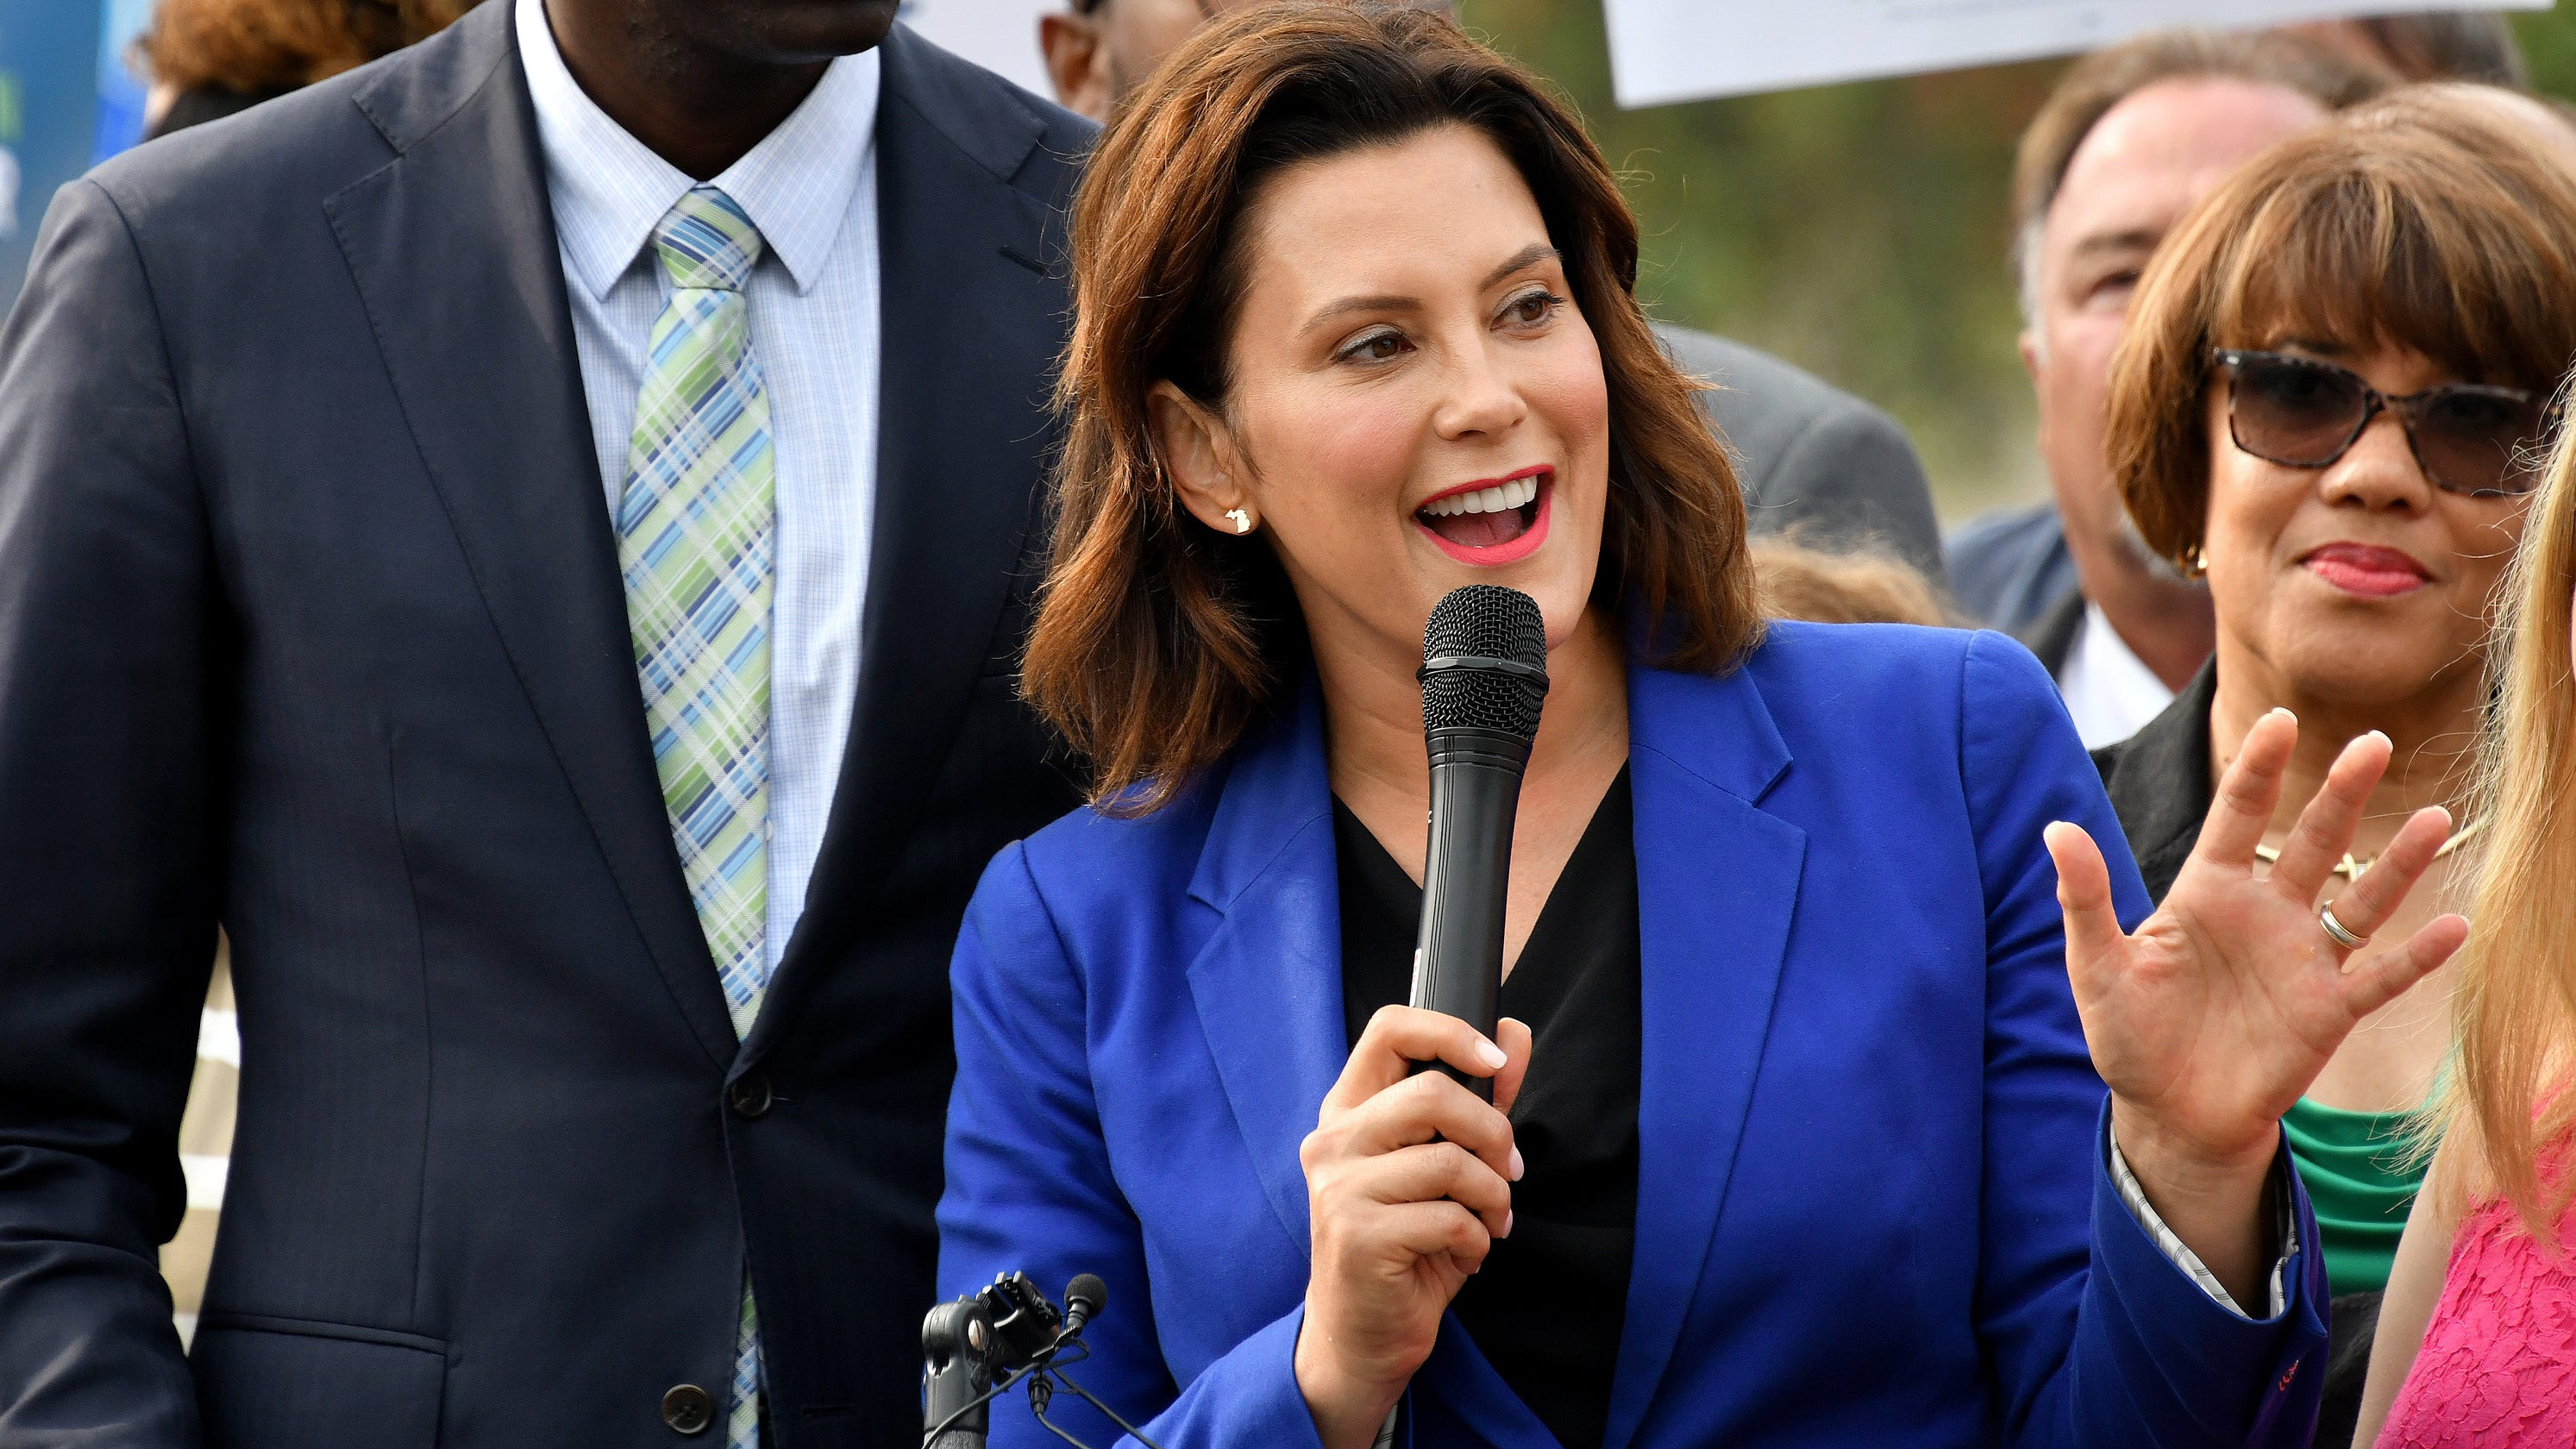 Poll: Whitmer leads Schuette by comfortable edge in Michigan gov's race2987 x 1680